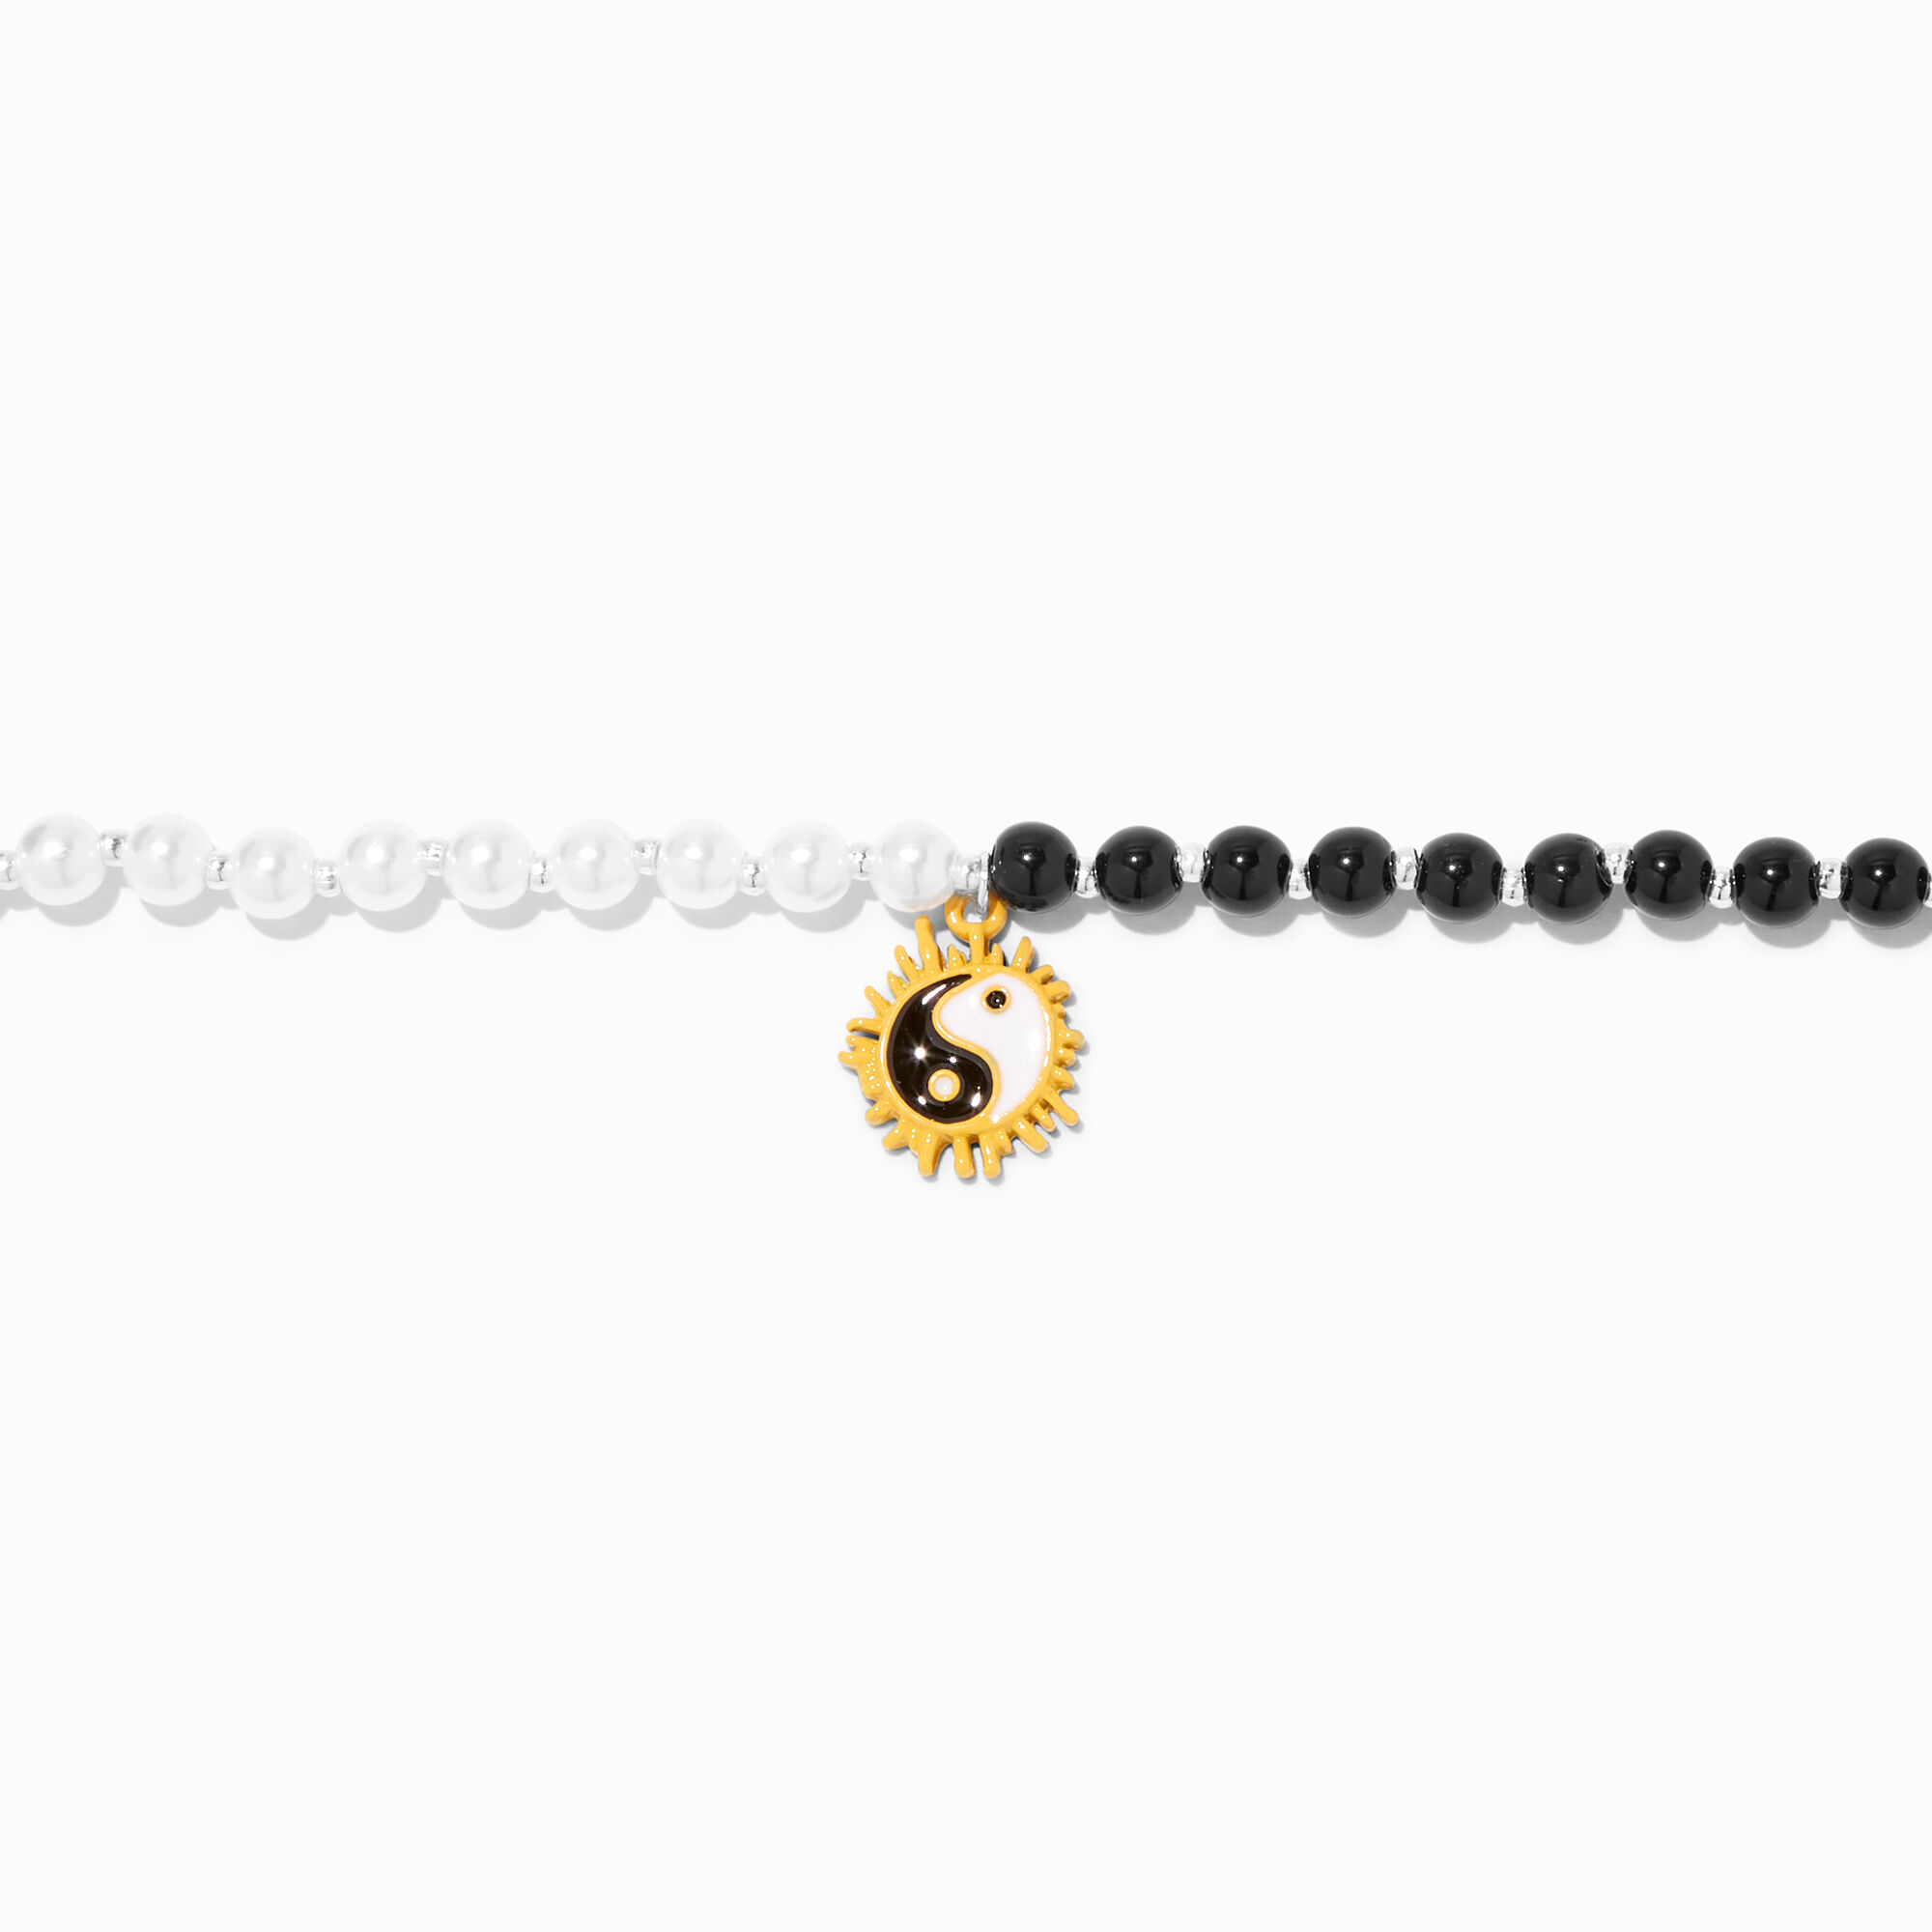 View Claires Sunburst Yin Yang Beaded Choker Necklace Black information